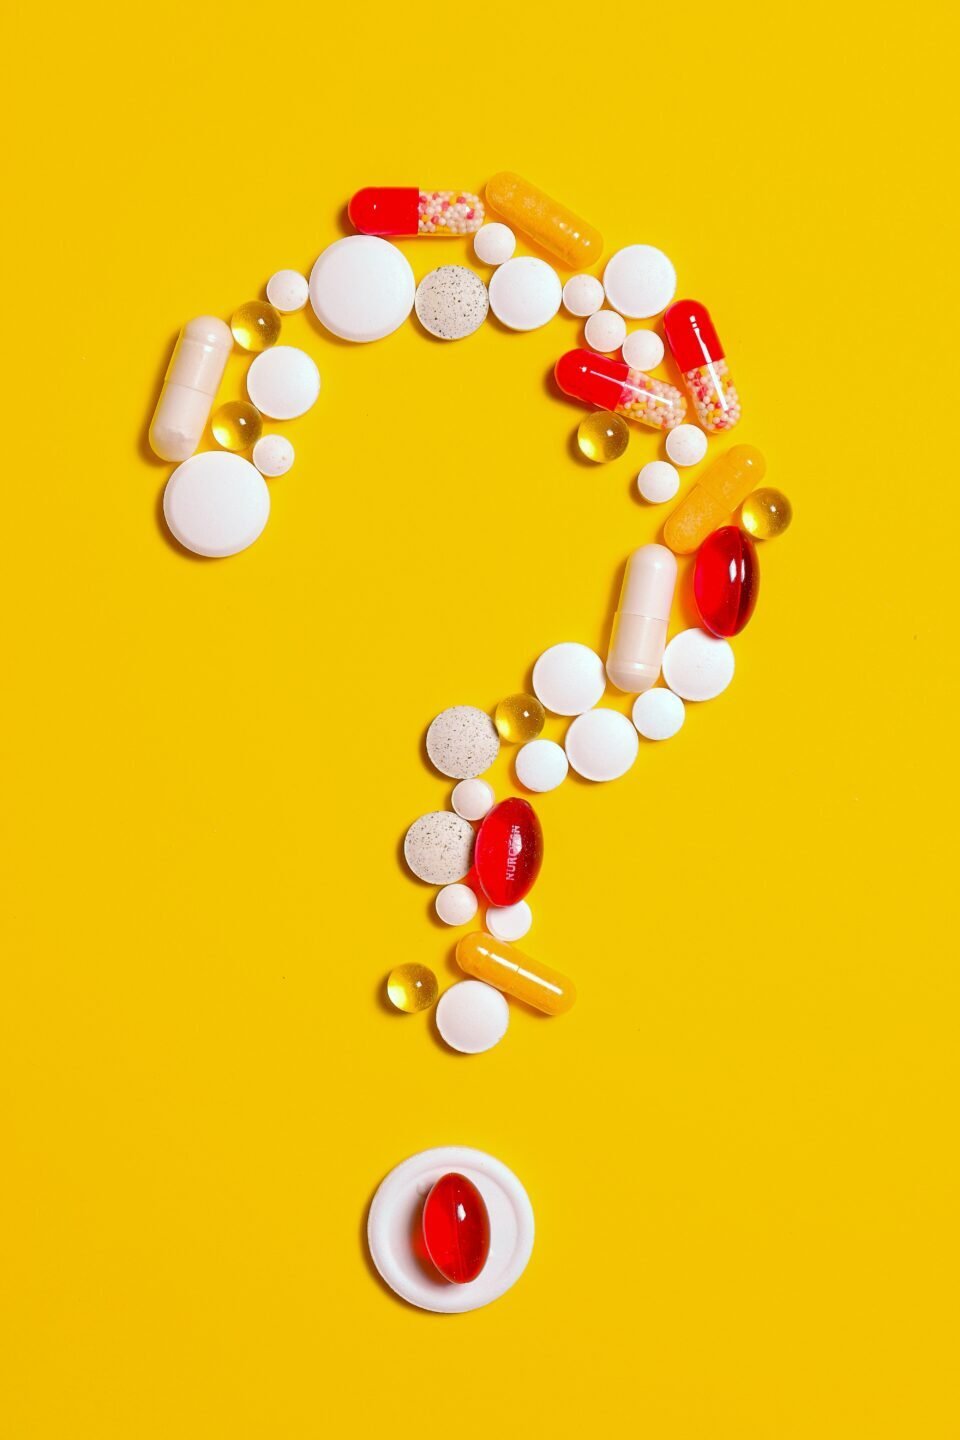 question mark made of vitamins and pills